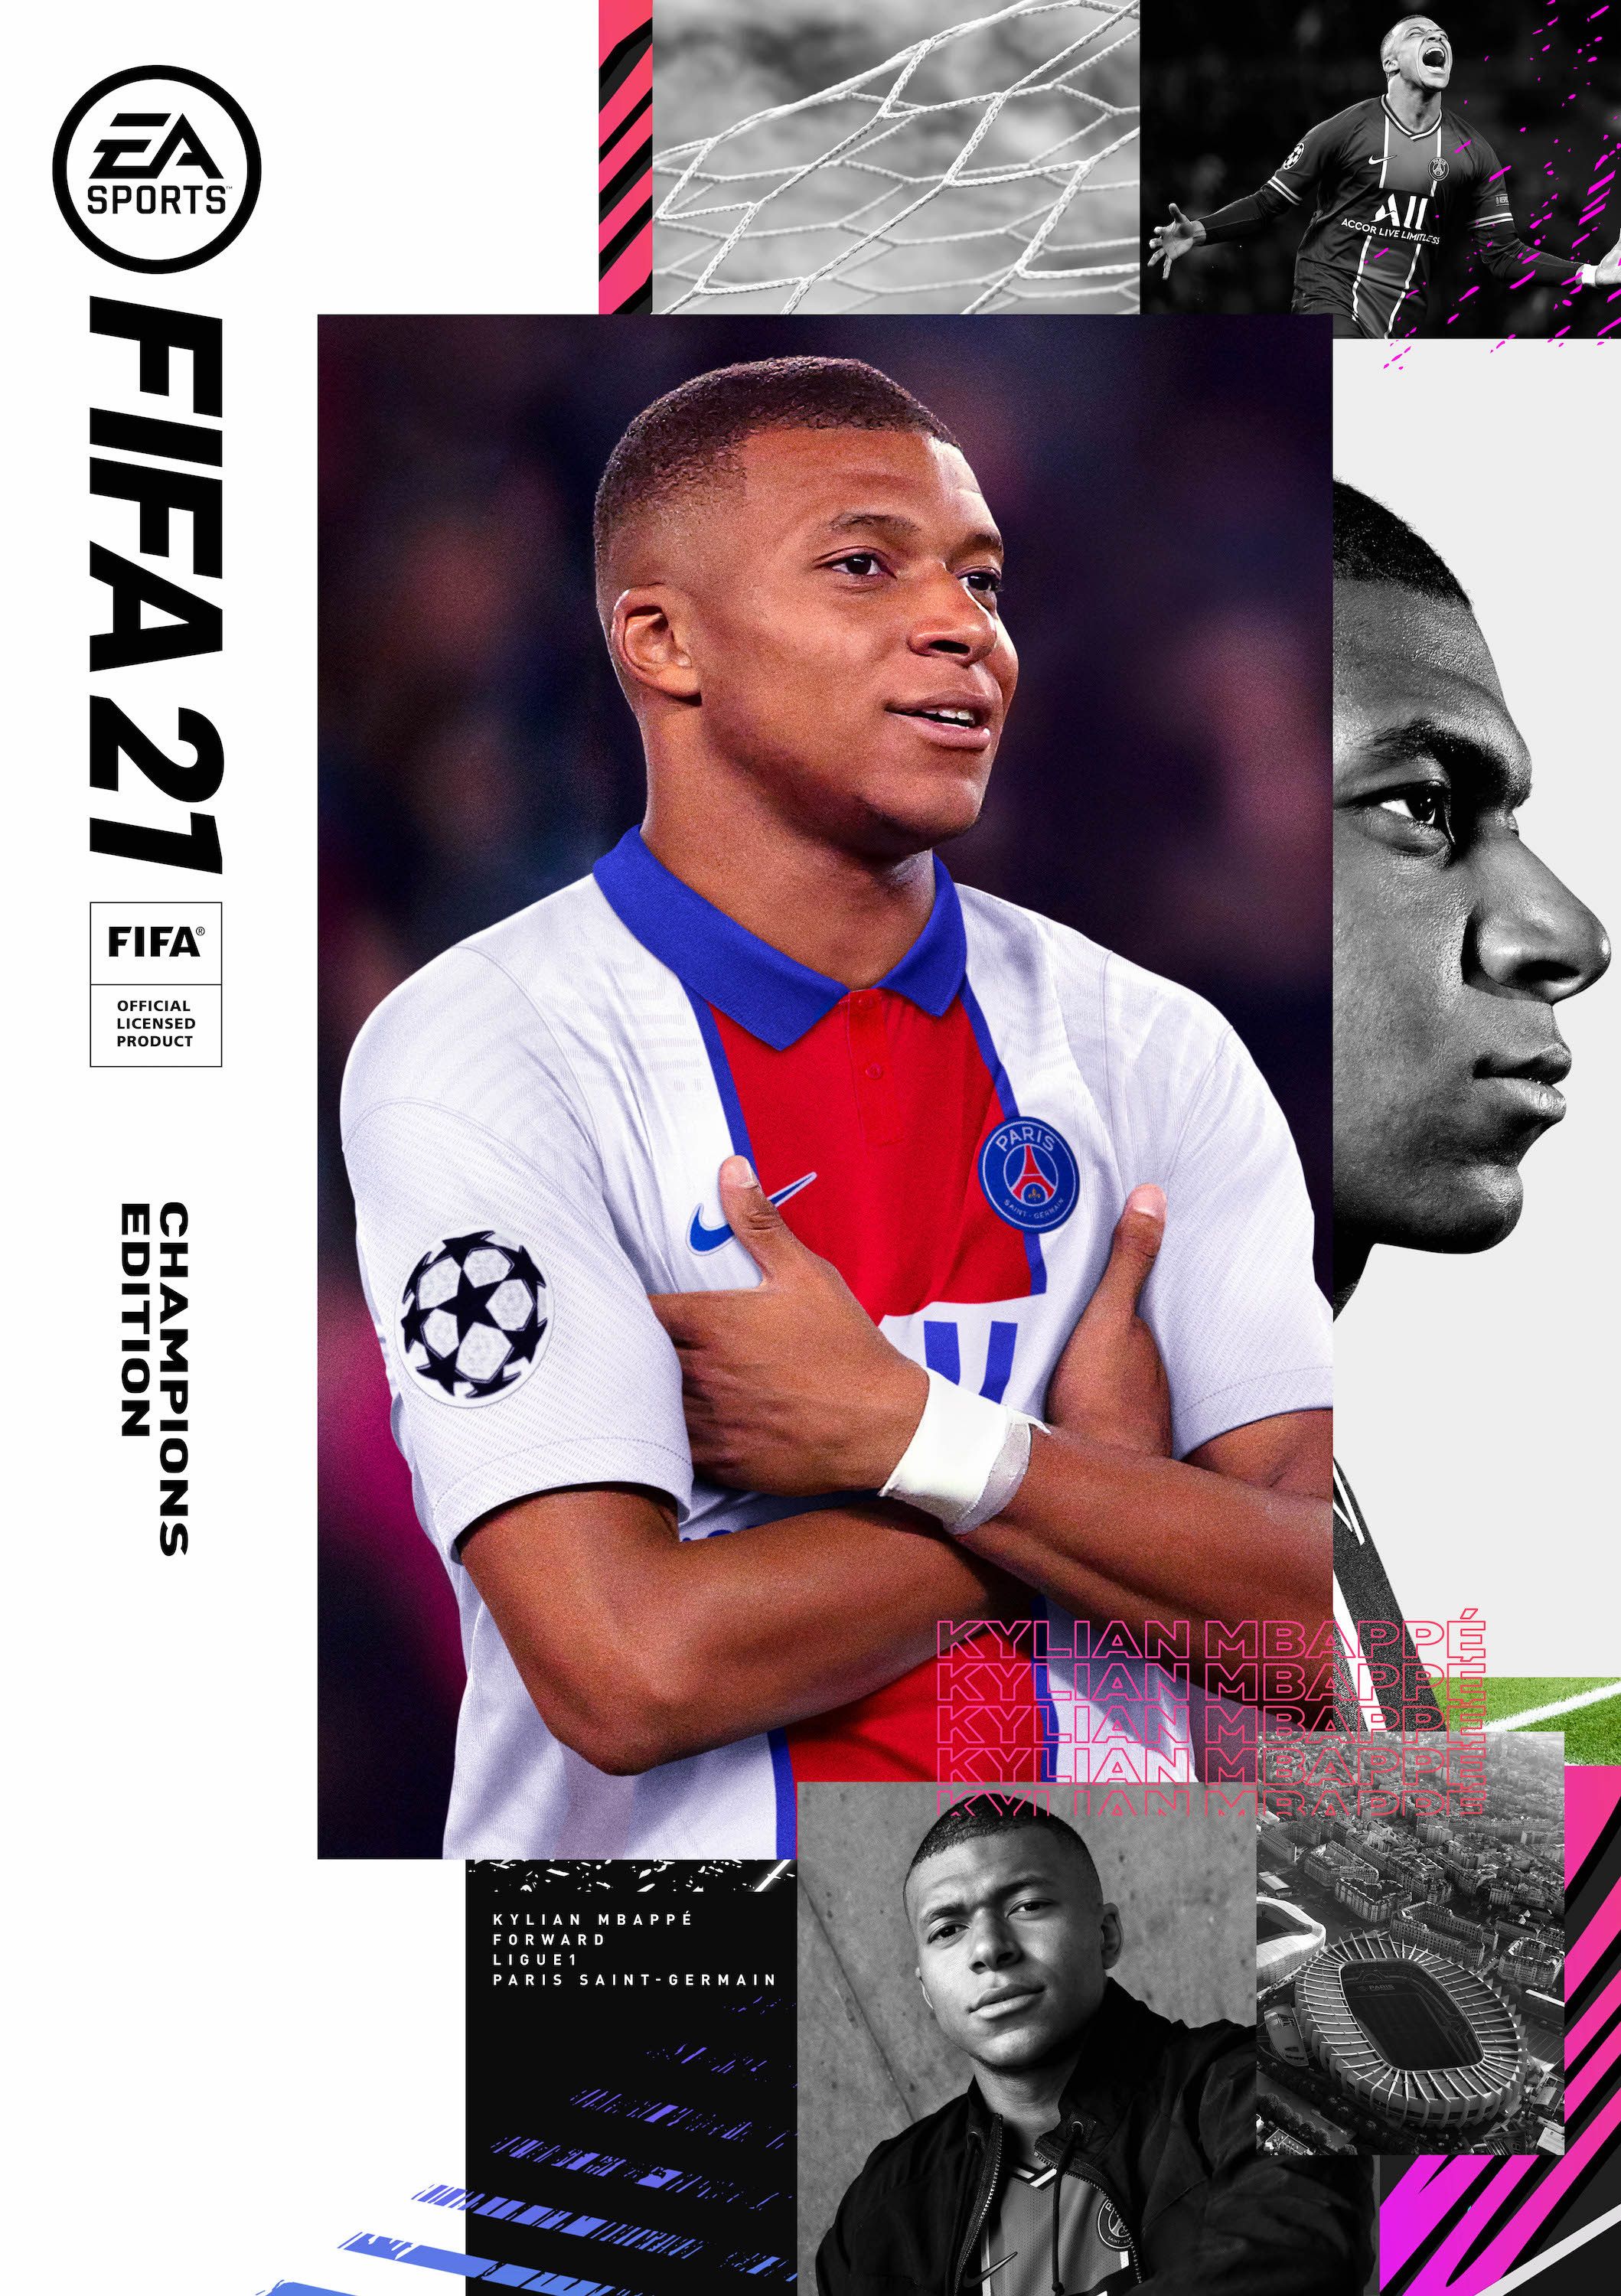 Mbappè is the cover star of FIFA 21gamereactor.eu